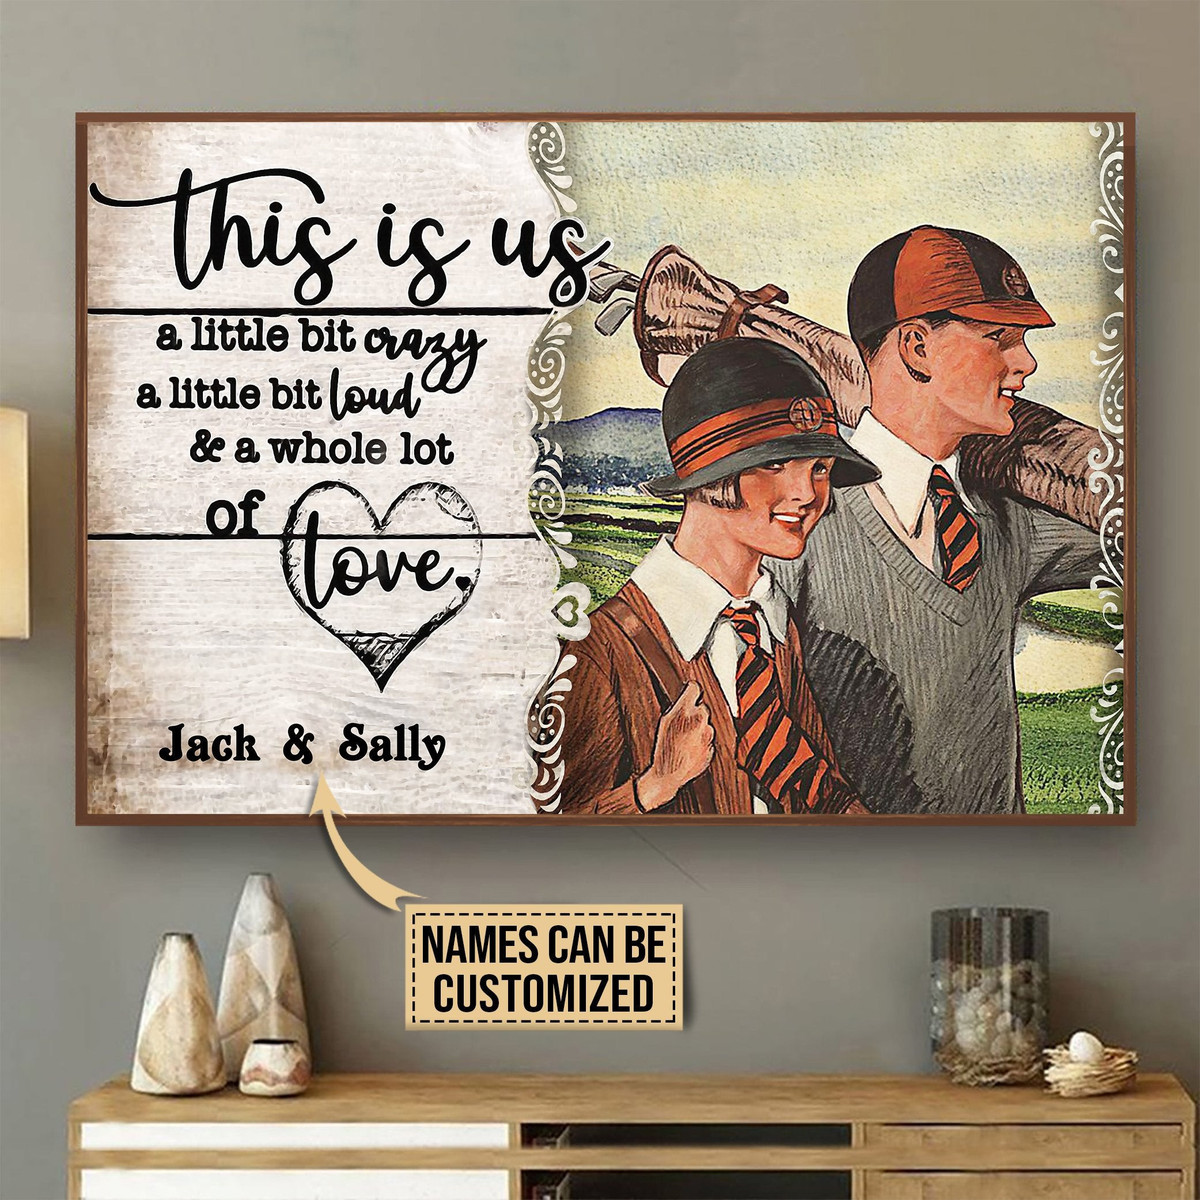 Personalized Canvas Painting Frames Golf This Is Us Framed Prints, Canvas Paintings Wrapped Canvas 8x10